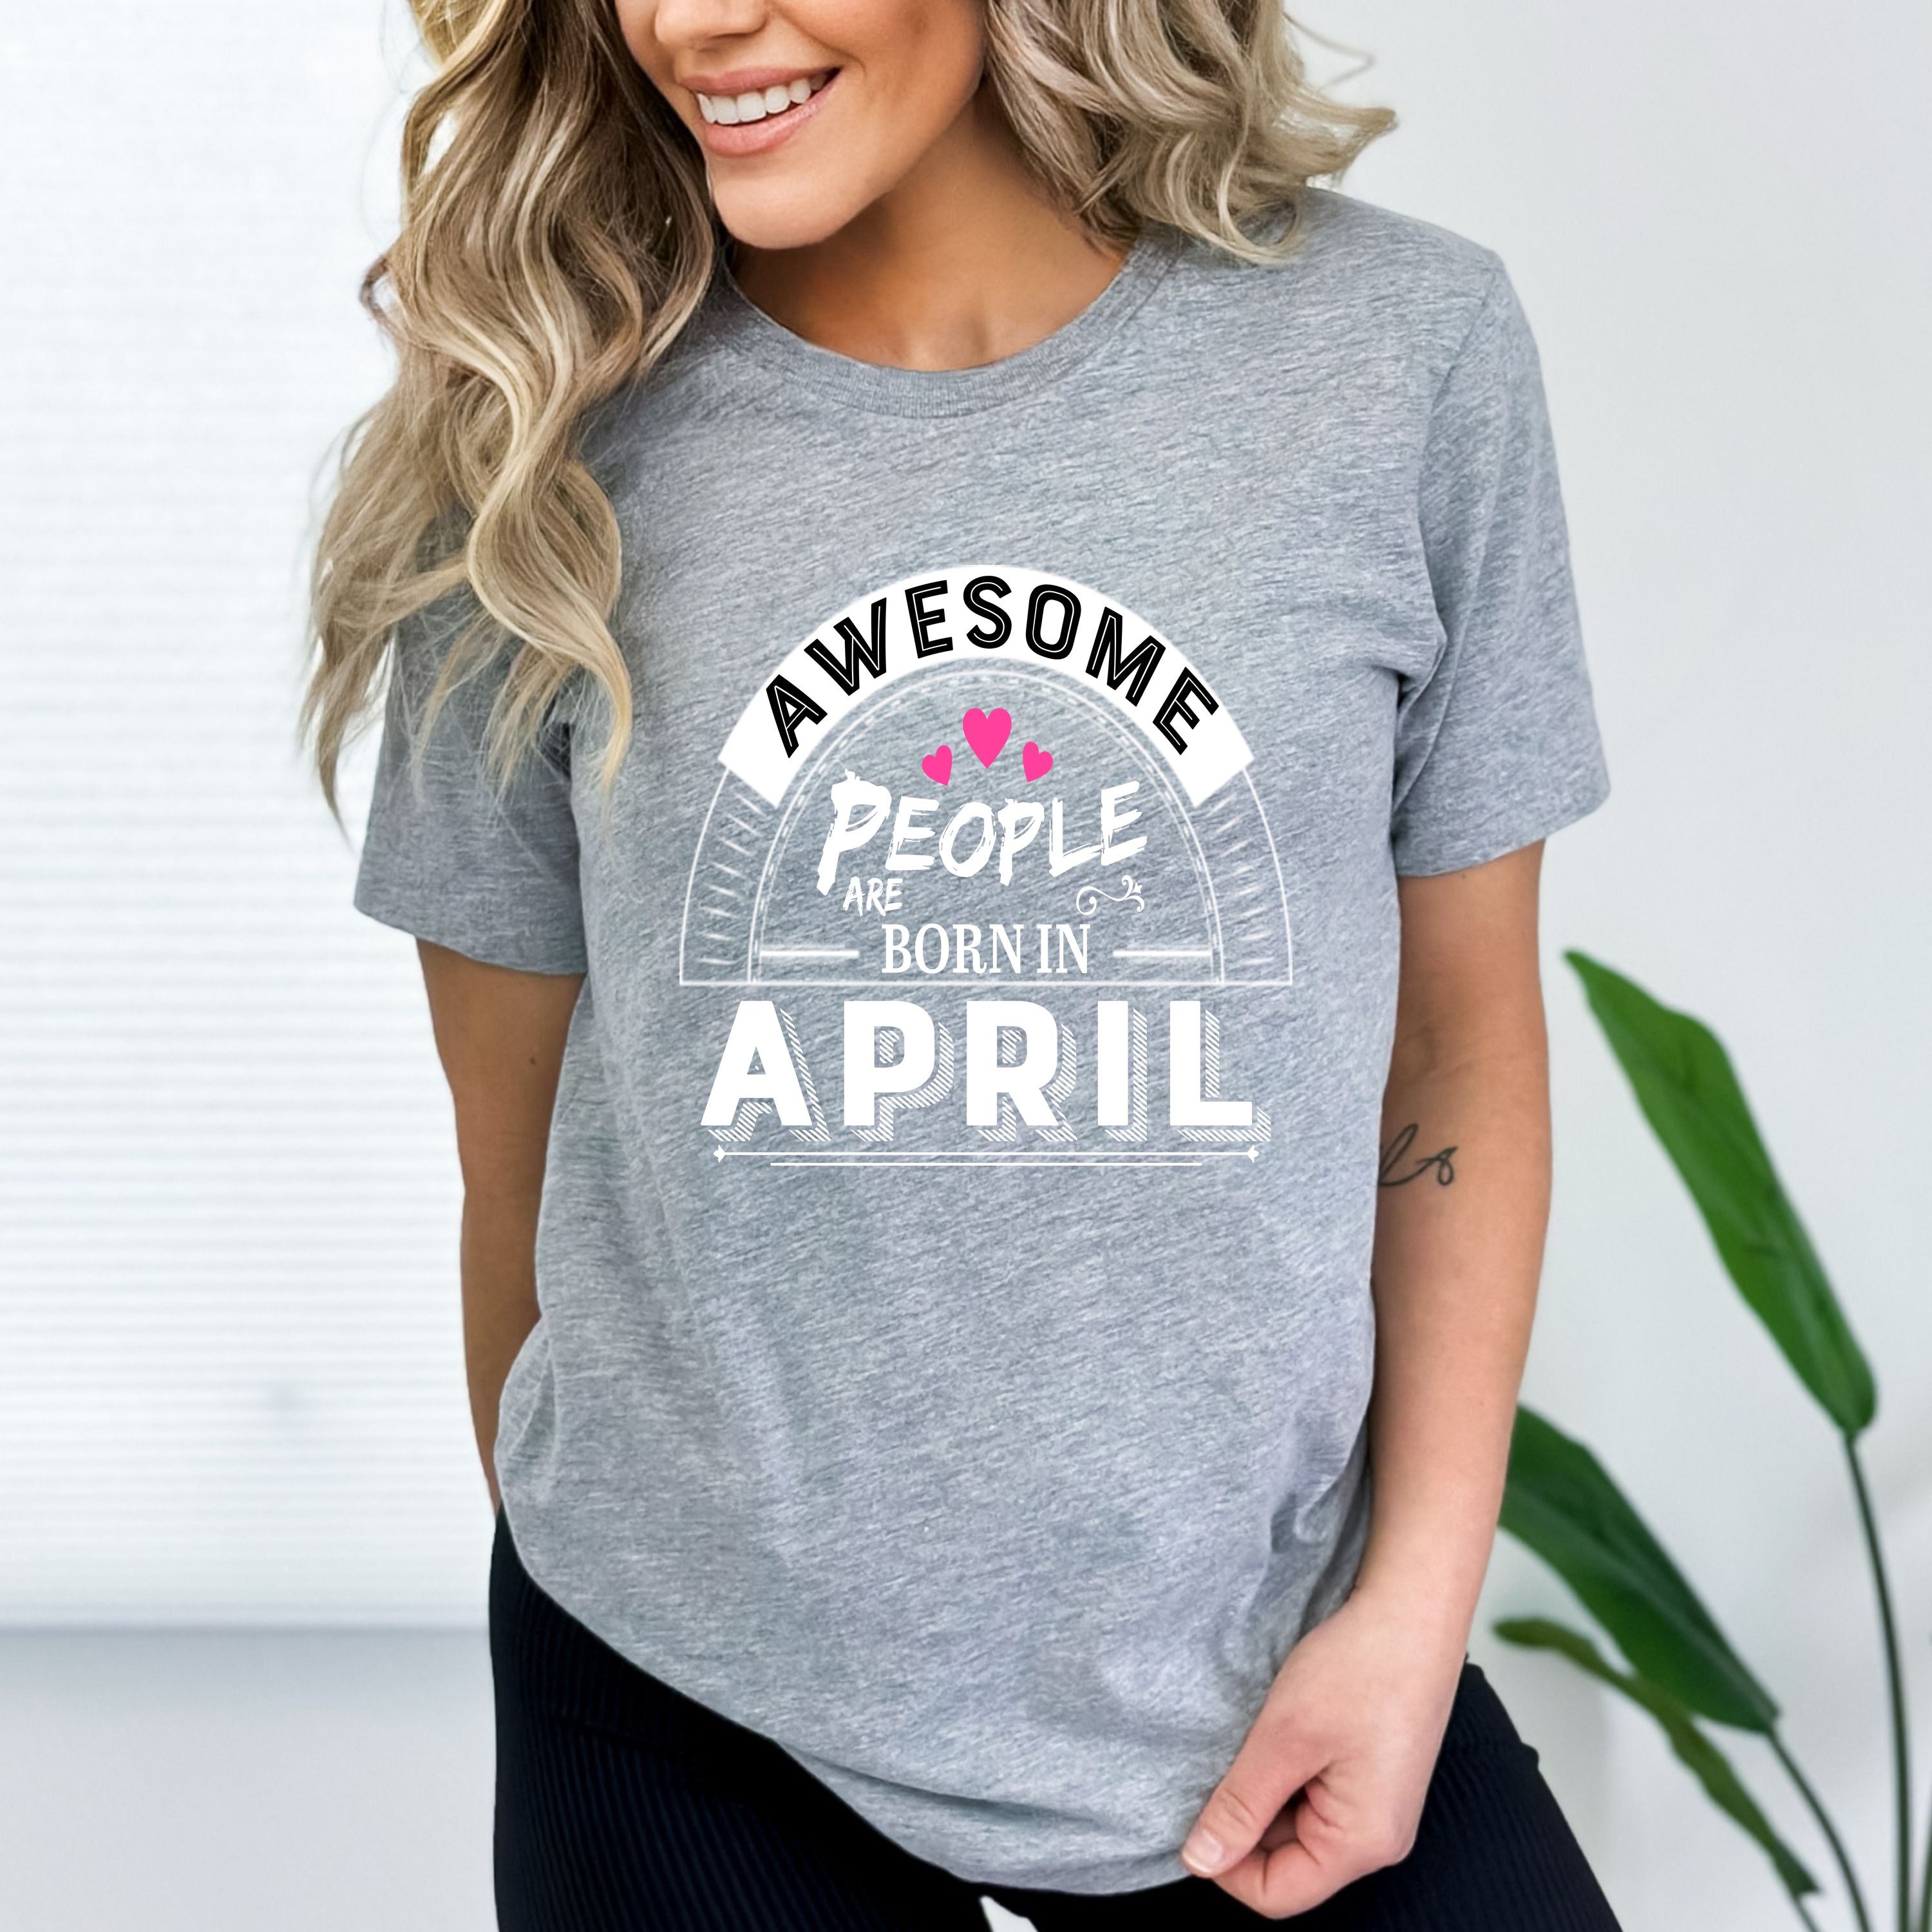 "Awesome People Are Born In April"